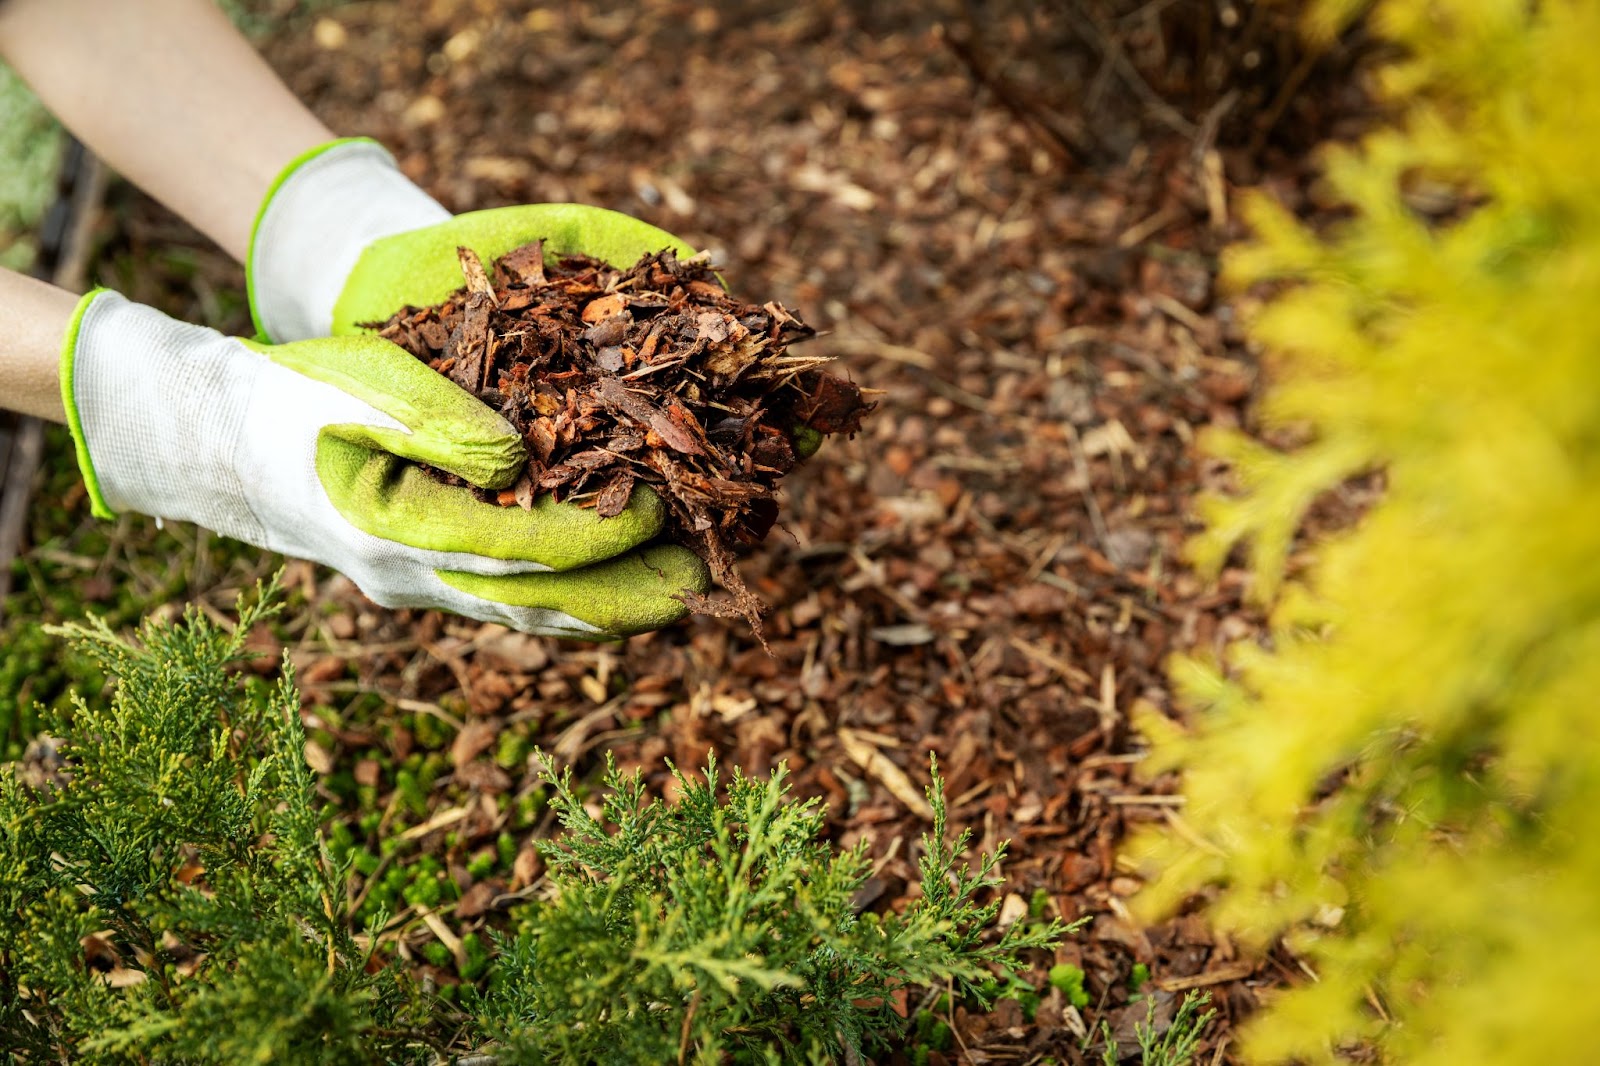 Fresh mulch can help a yard look well kept as your home is being shown to buyers.